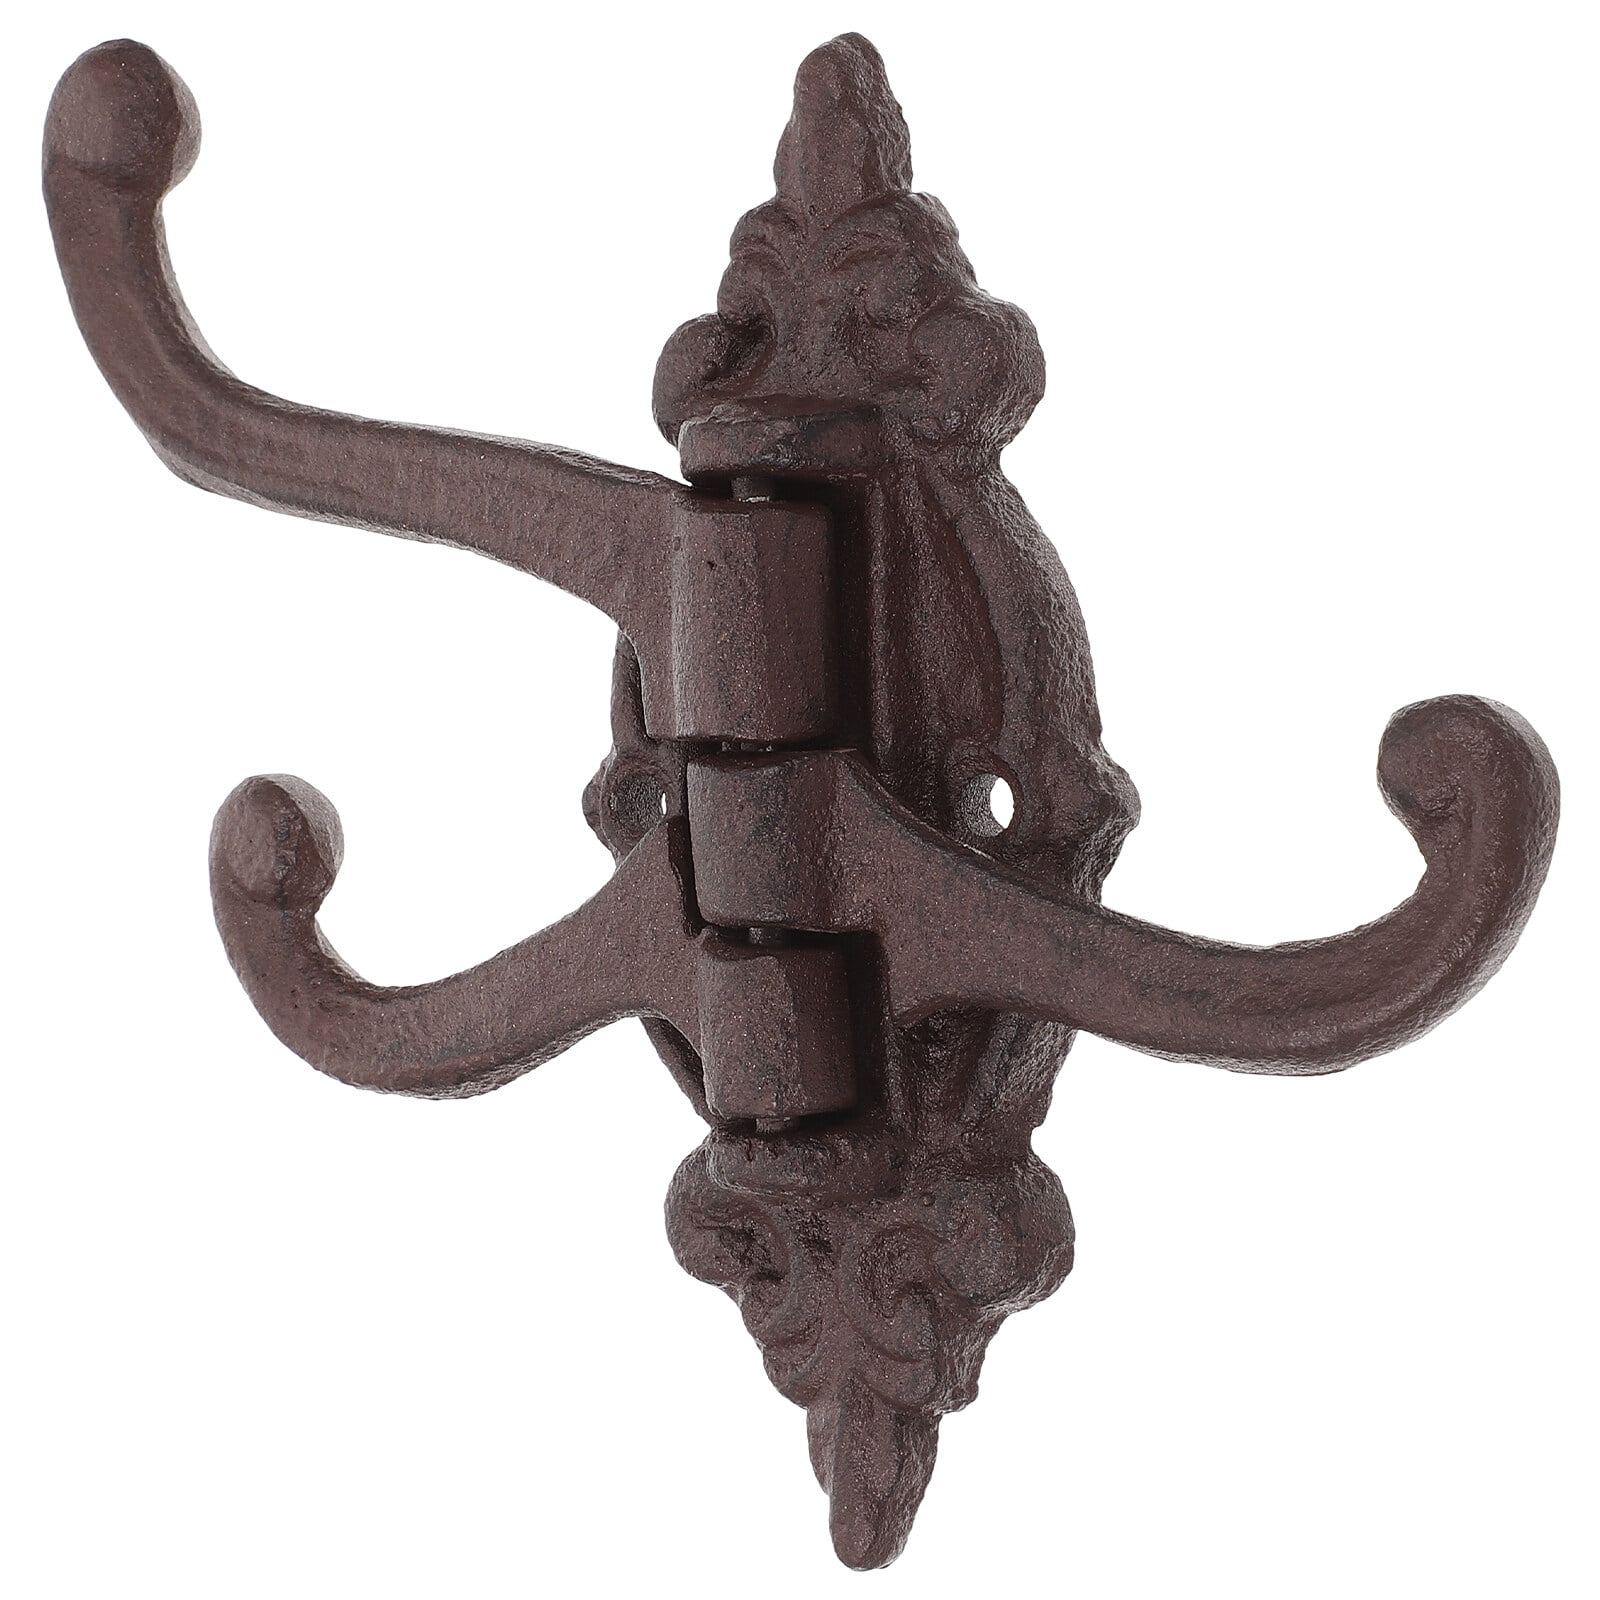 Buy Set of 4 or 8 Antique Style Rustic Flat Top Hat Coat Hooks Cast Iron  Wall Mount Online in India 